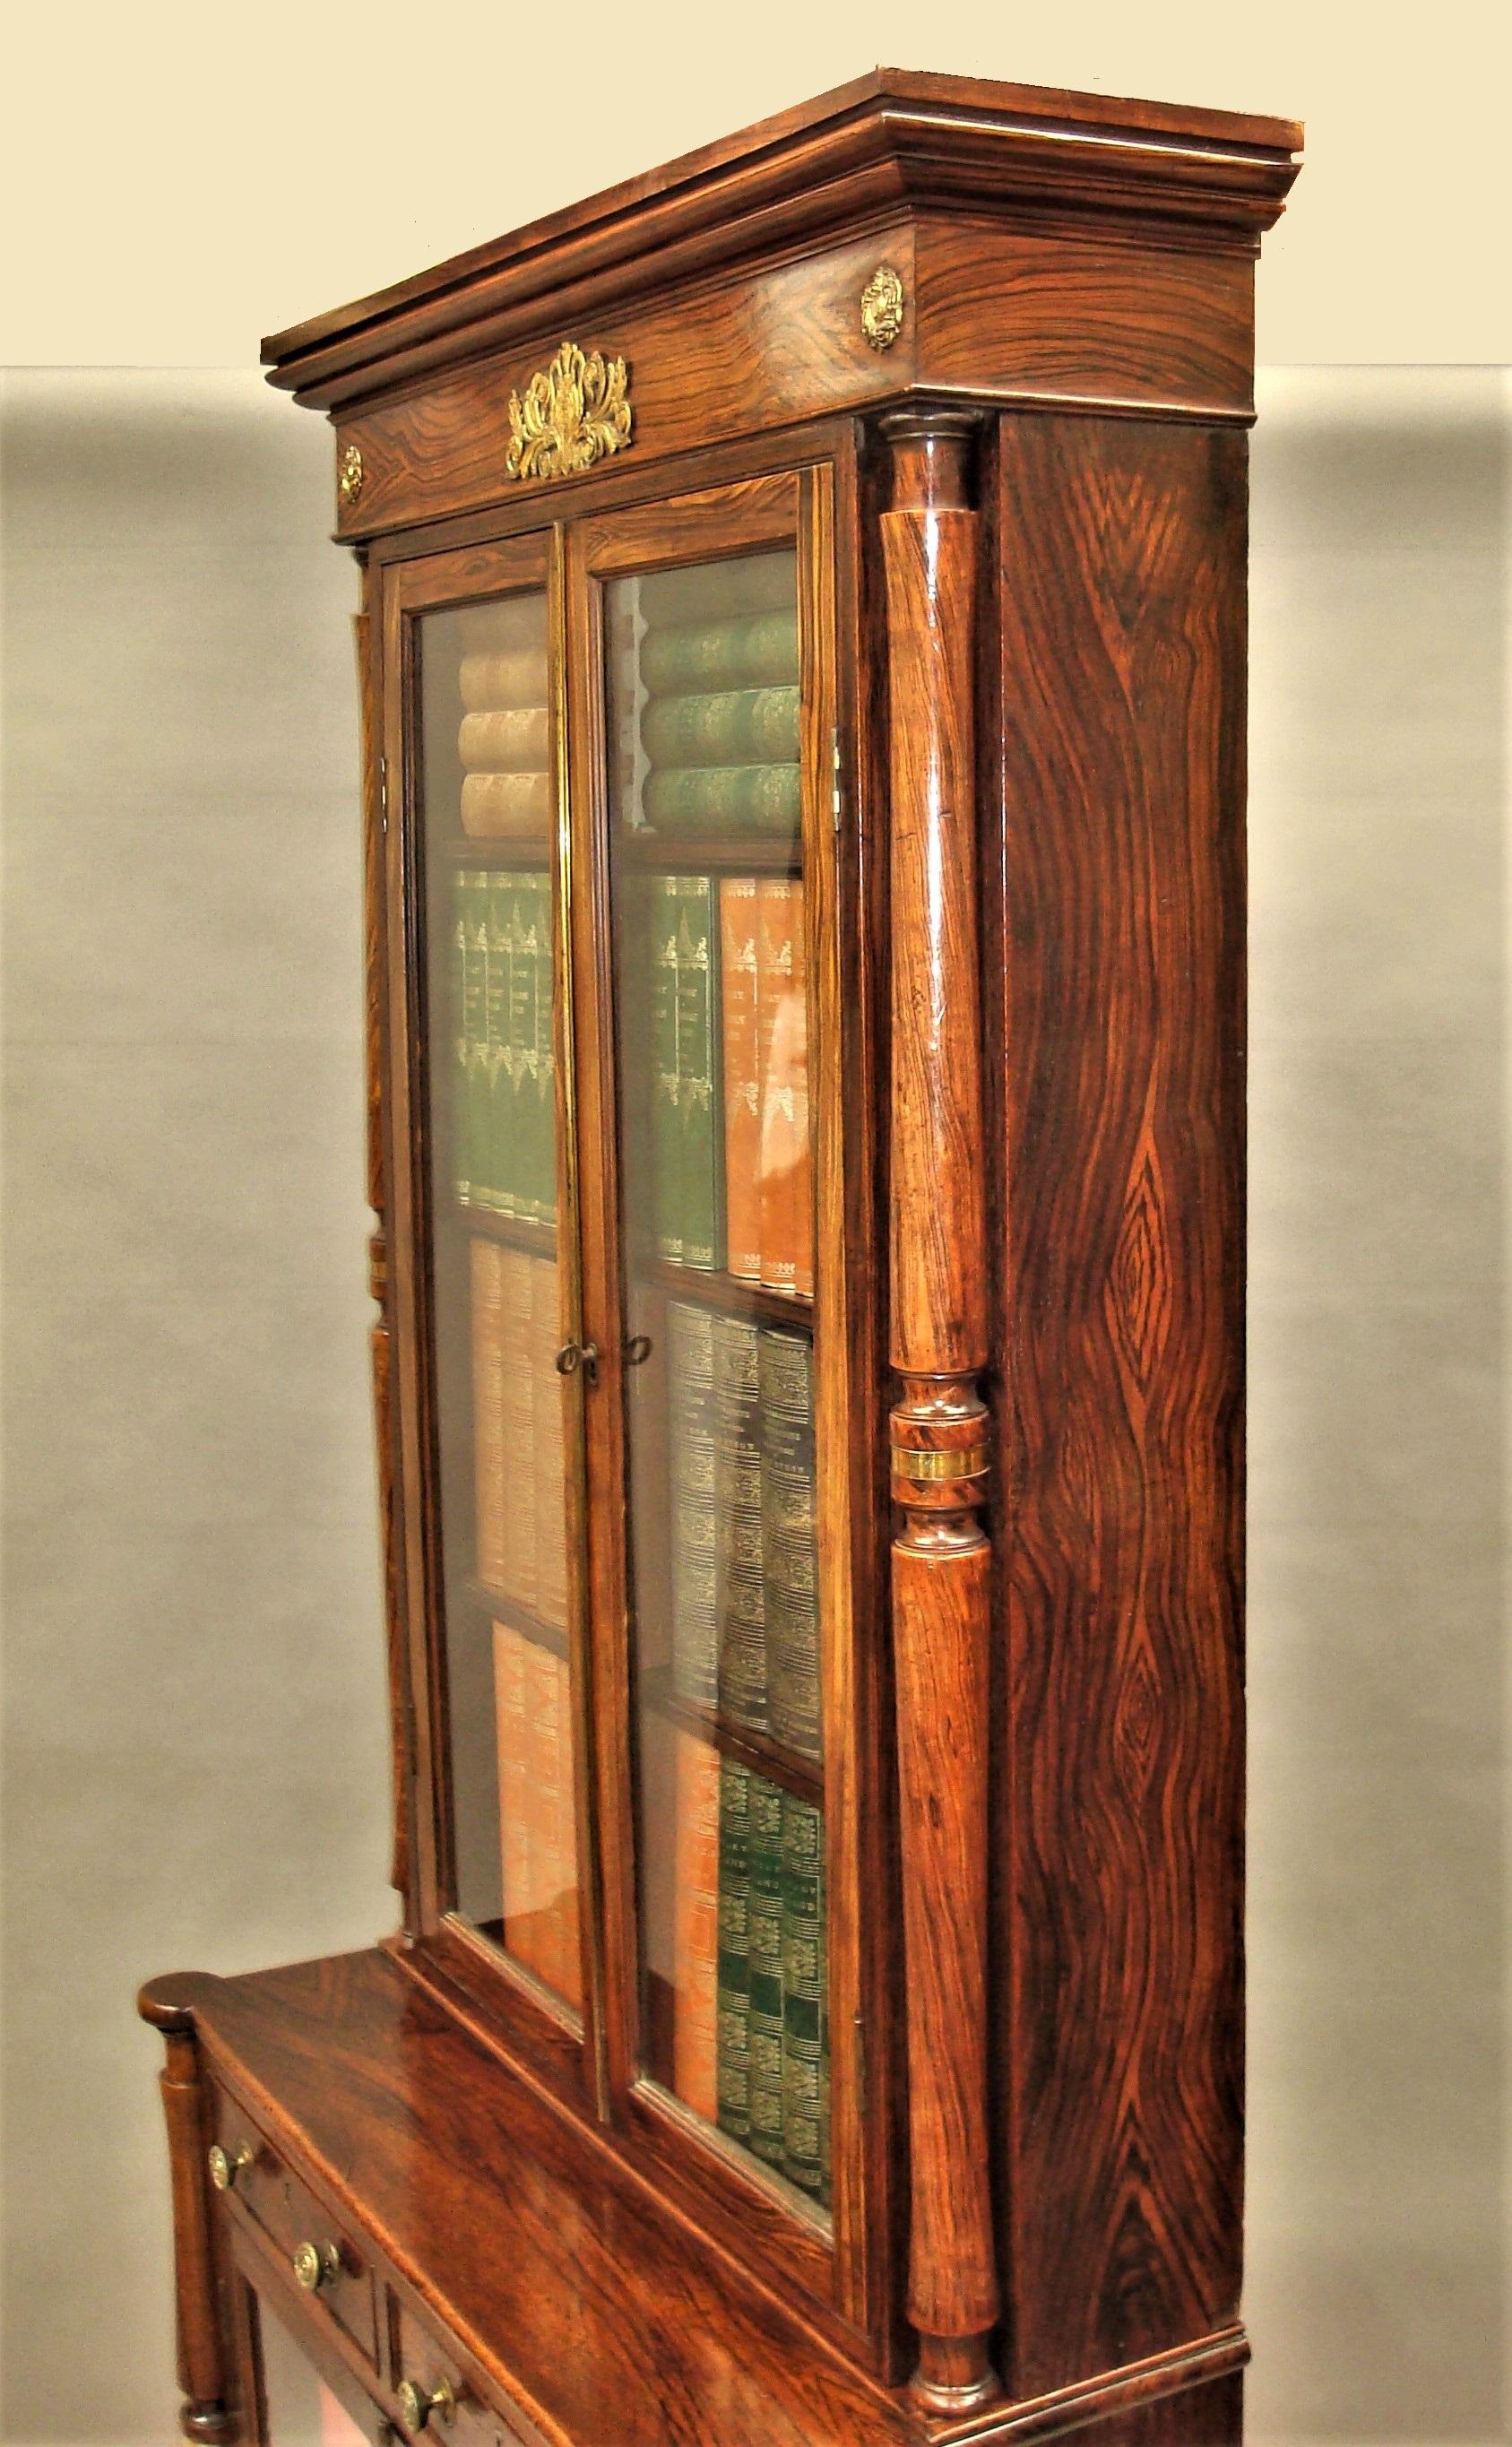 Regency Simulated Faux Calamader Bookcase of Small Proportions In Good Condition For Sale In Moreton-in-Marsh, Gloucestershire